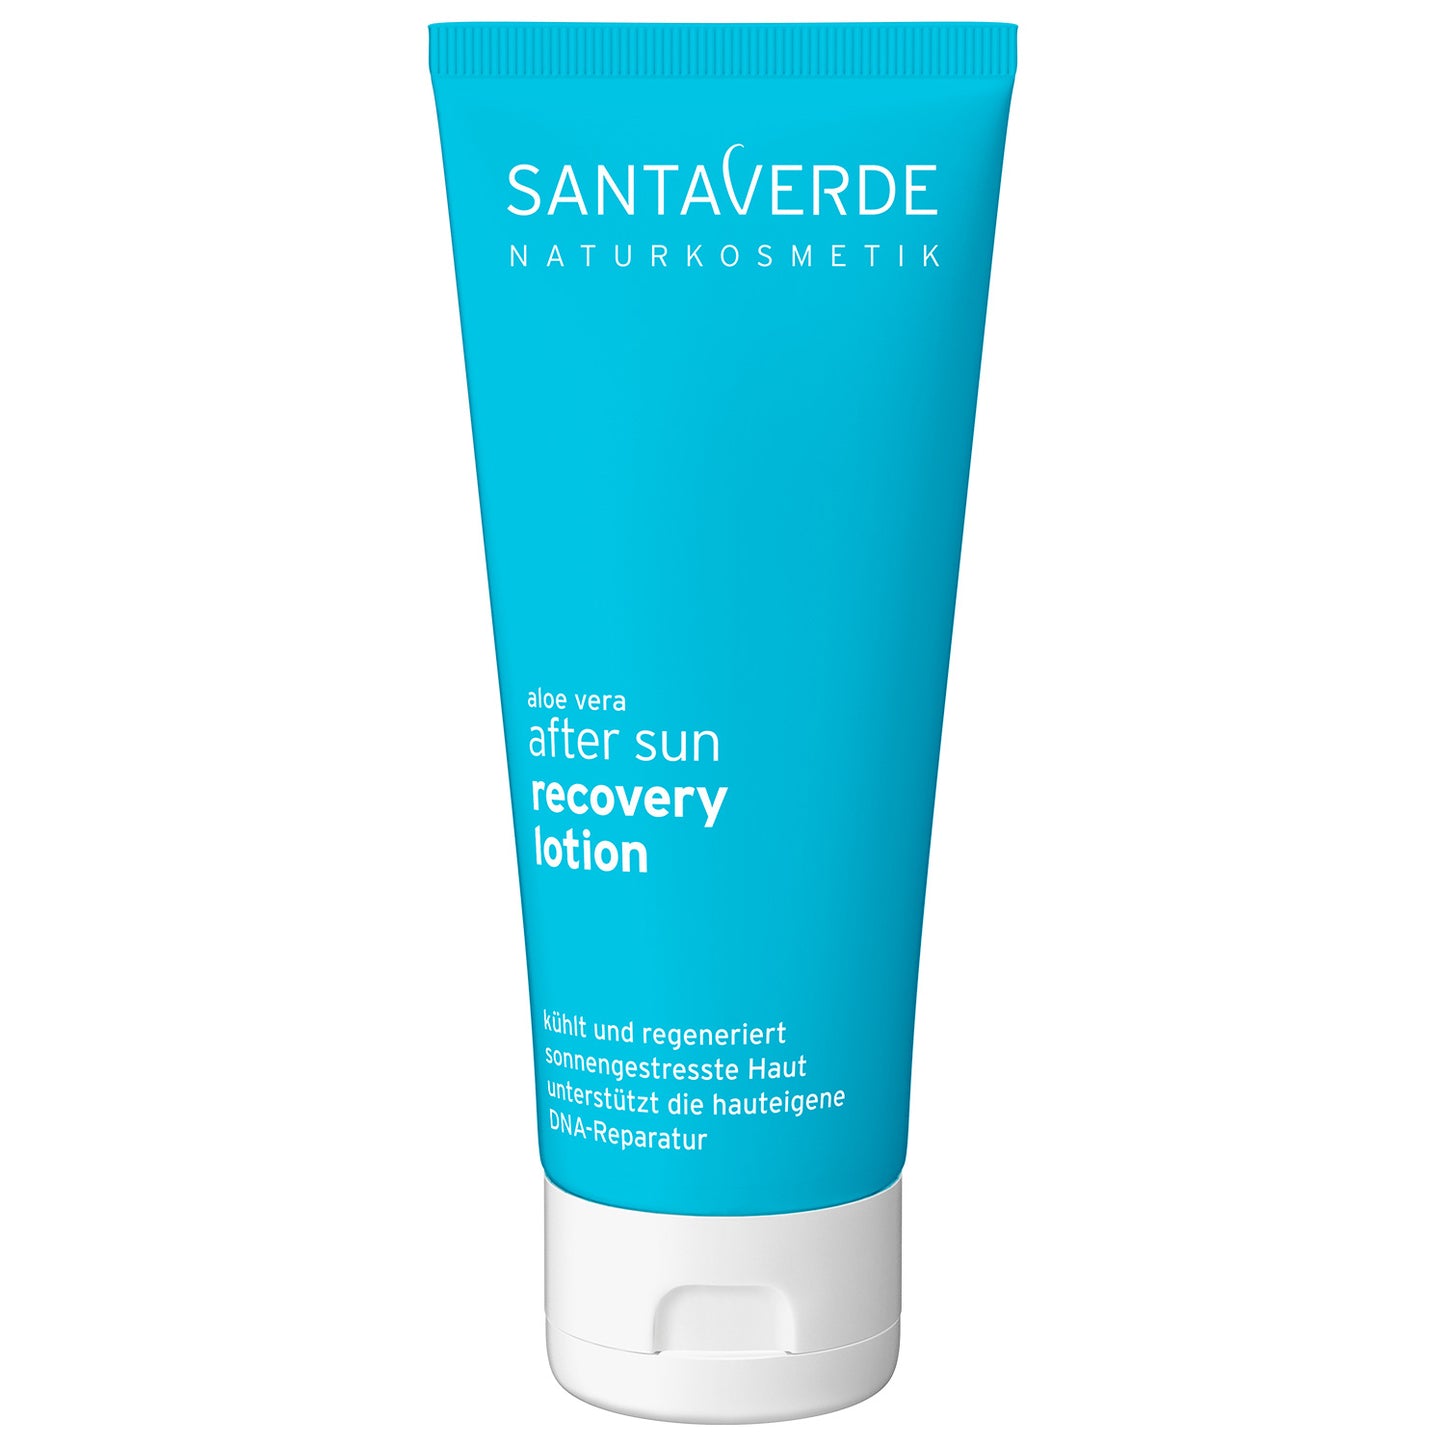 Santaverde - After Sun Recovery Lotion 100ml